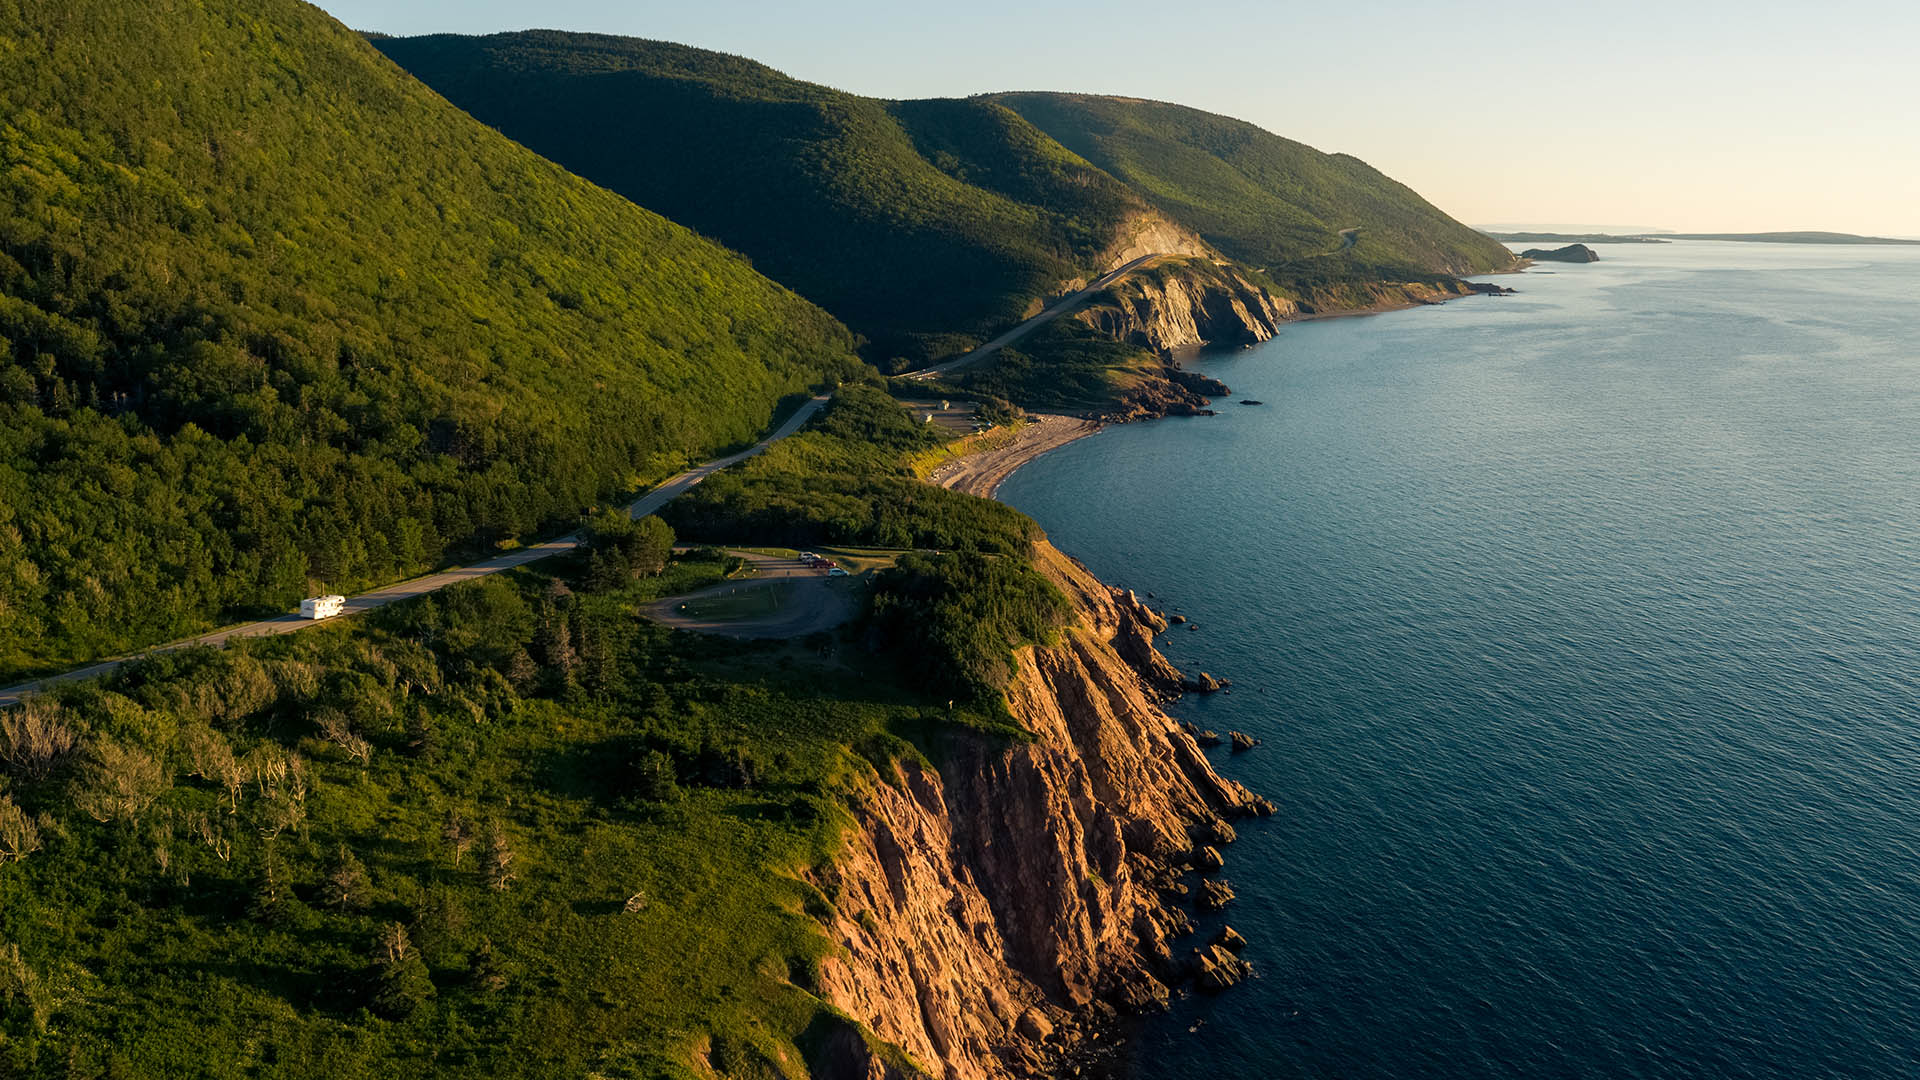 The Best Way to Travel the Cabot Trail | Tourism Nova Scotia